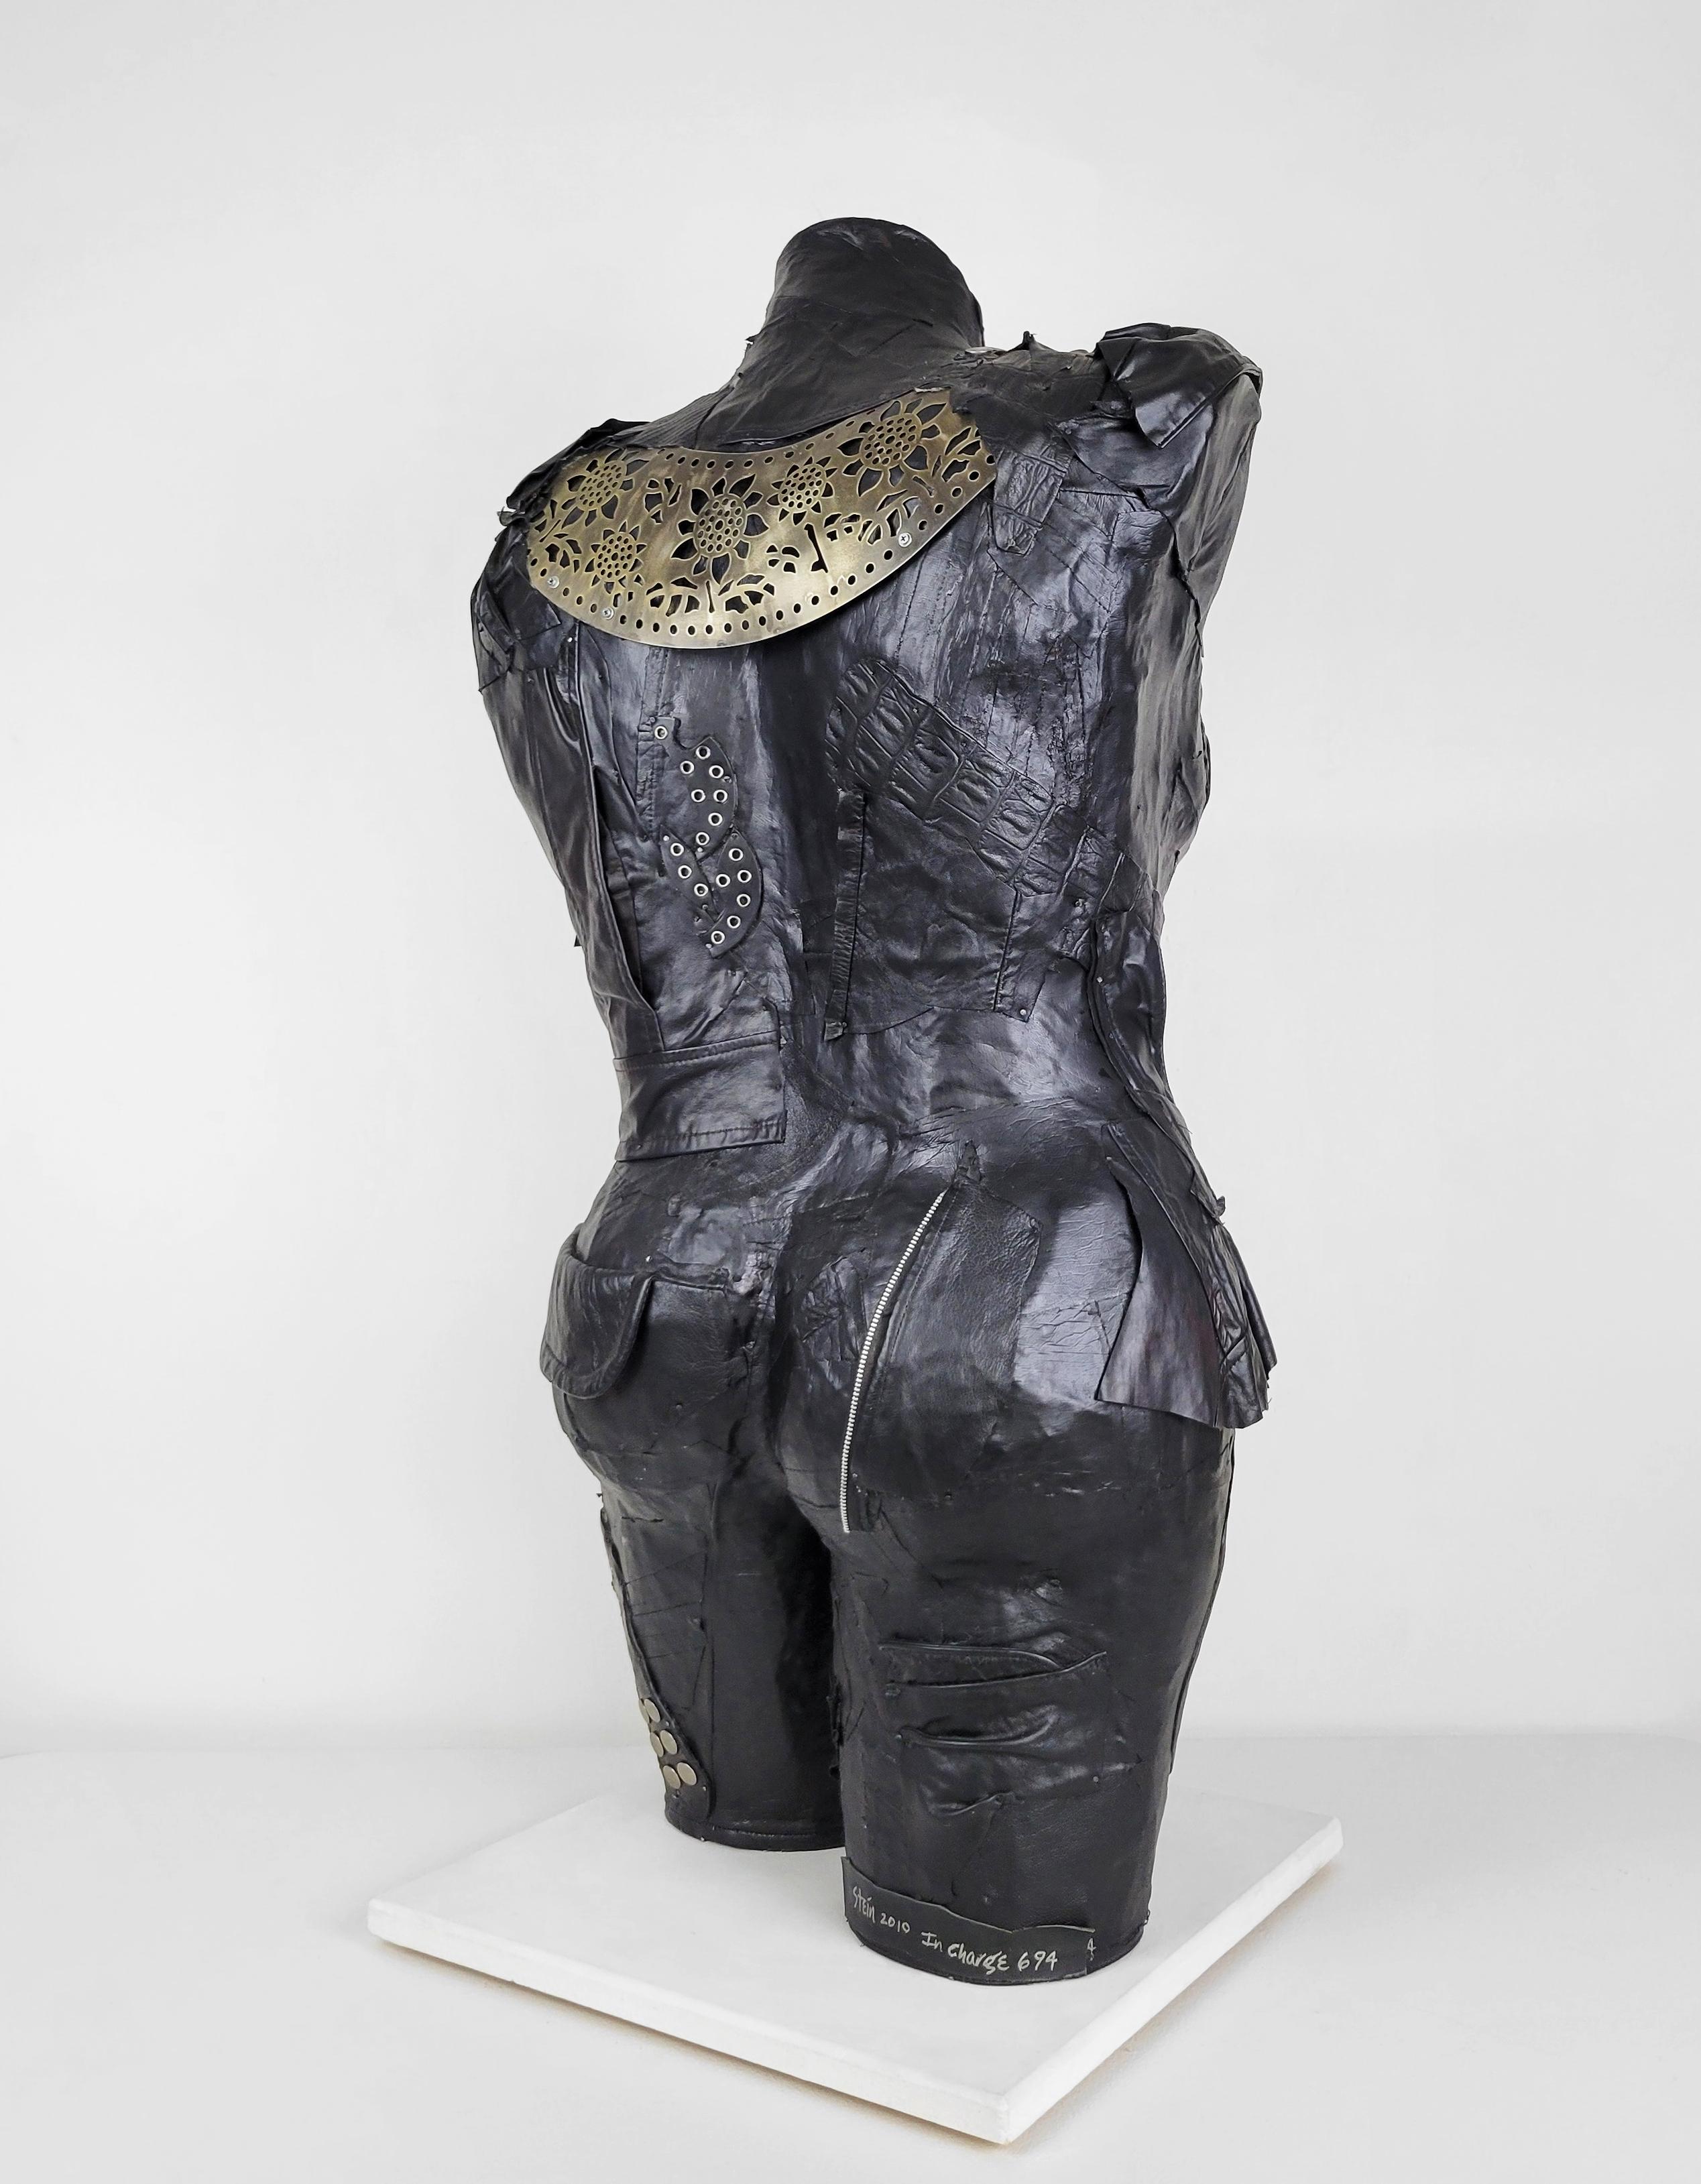 Feminist Contemporary Black/Silver Leather Metal Torso Sculpture - In Charge 694 For Sale 2